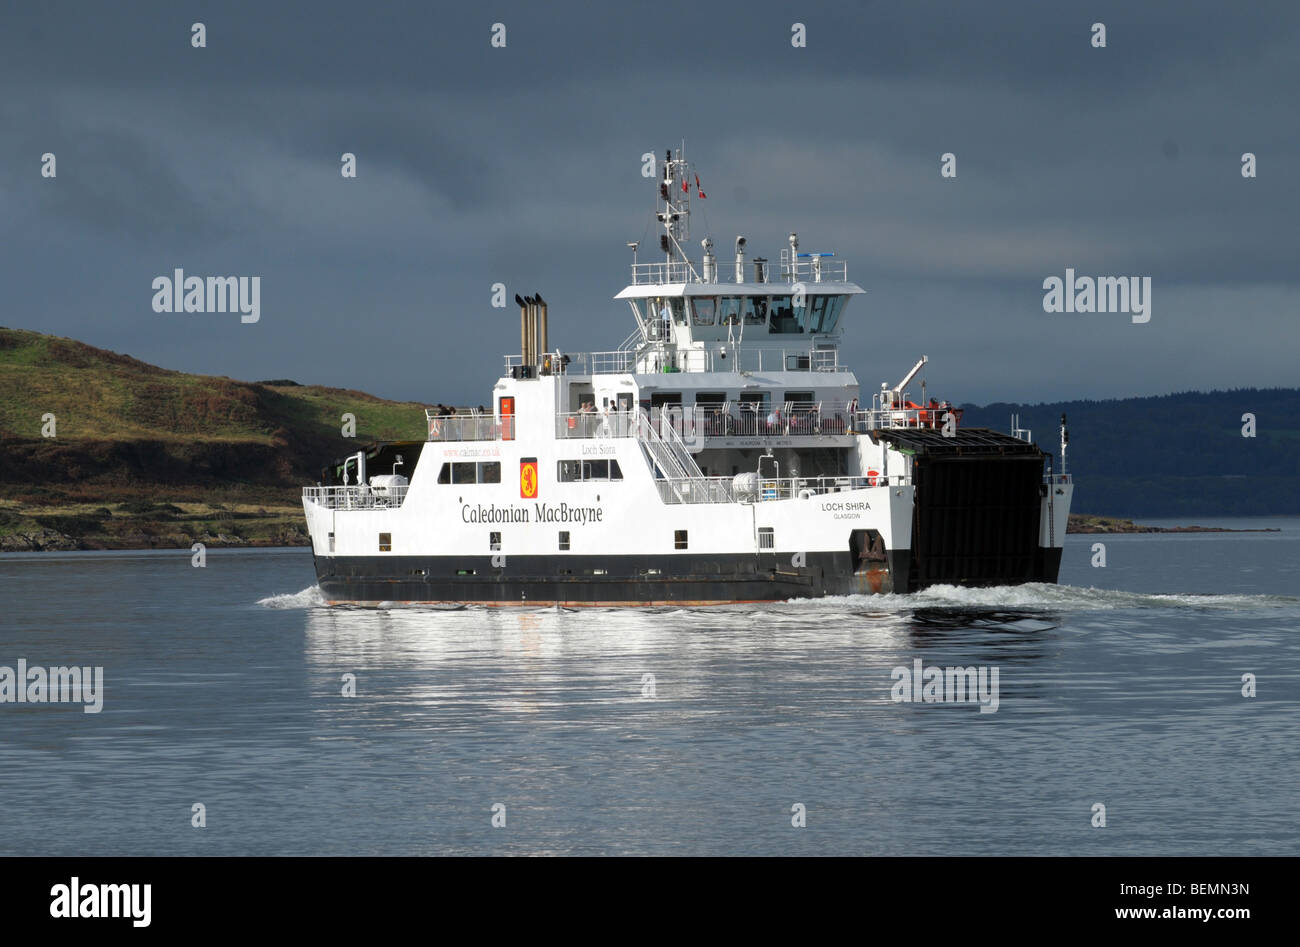 A small inter island ferry off the West coast of Scotland between Largs and the island of Cumbrae Stock Photo